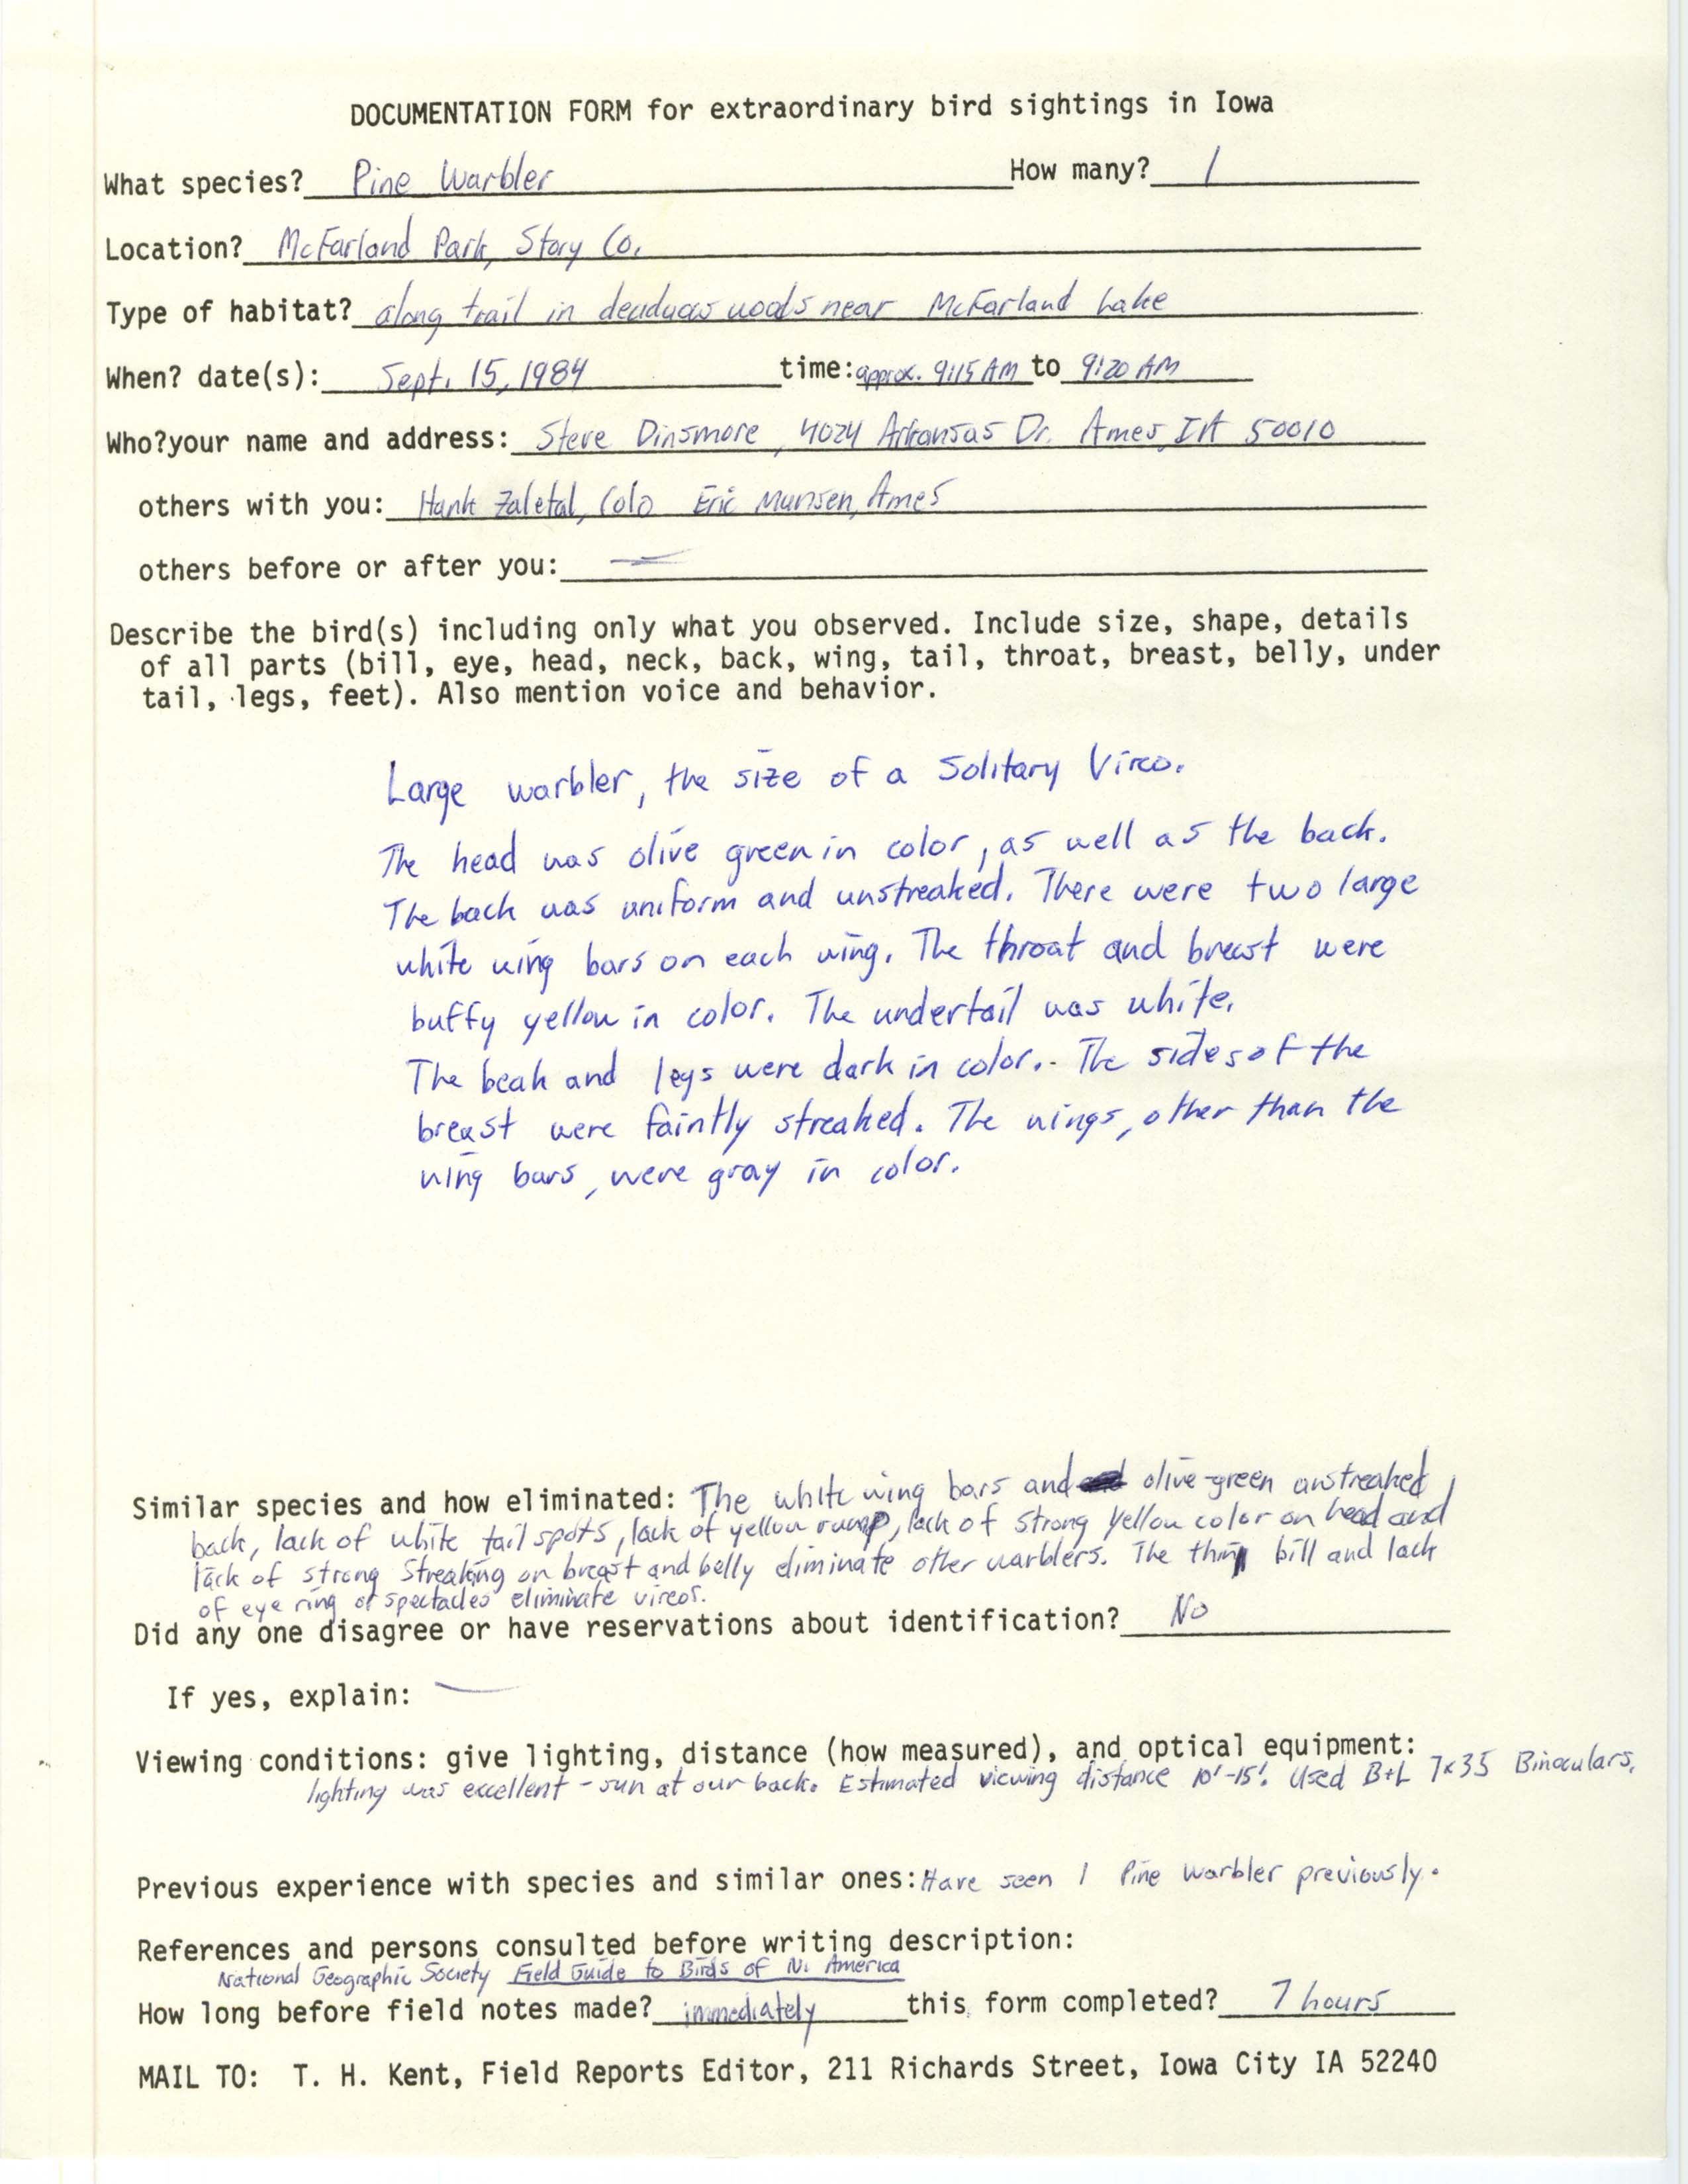 Rare bird documentation form for Pine Warbler at McFarland Park in Story County in 1984